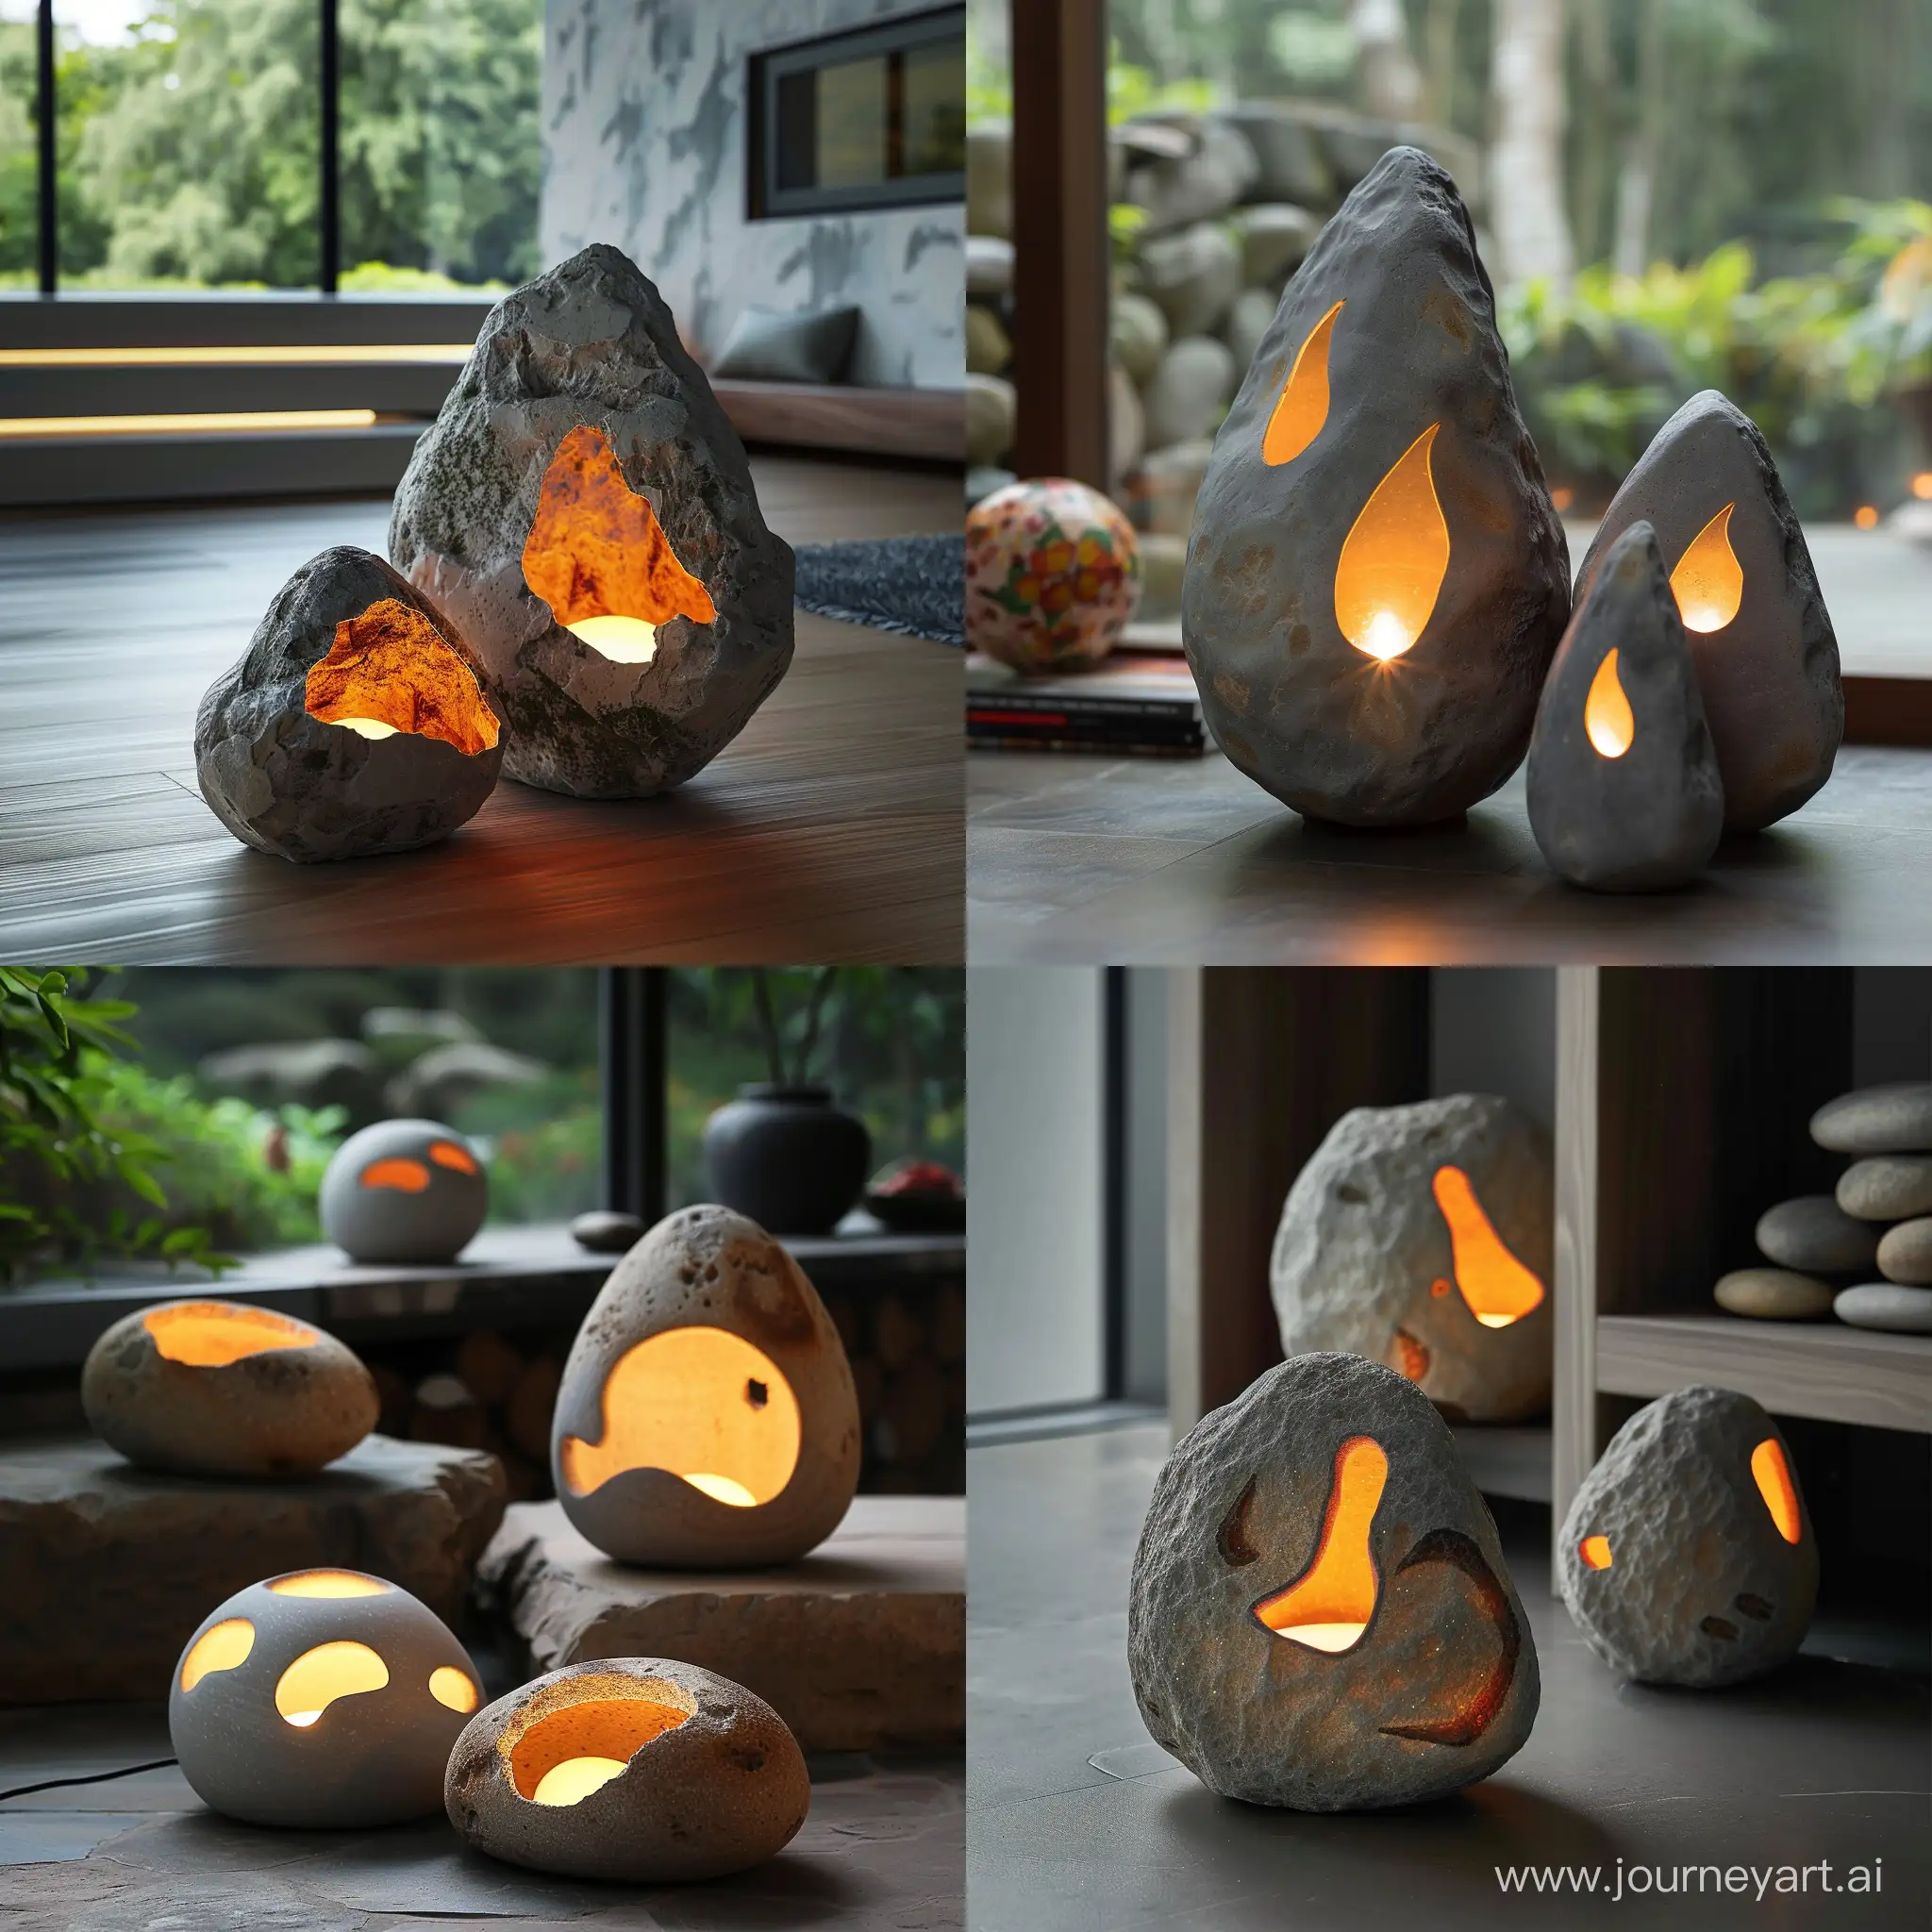 Sustainable-Living-Smart-LED-Pebbles-with-Customizable-Artistic-Designs